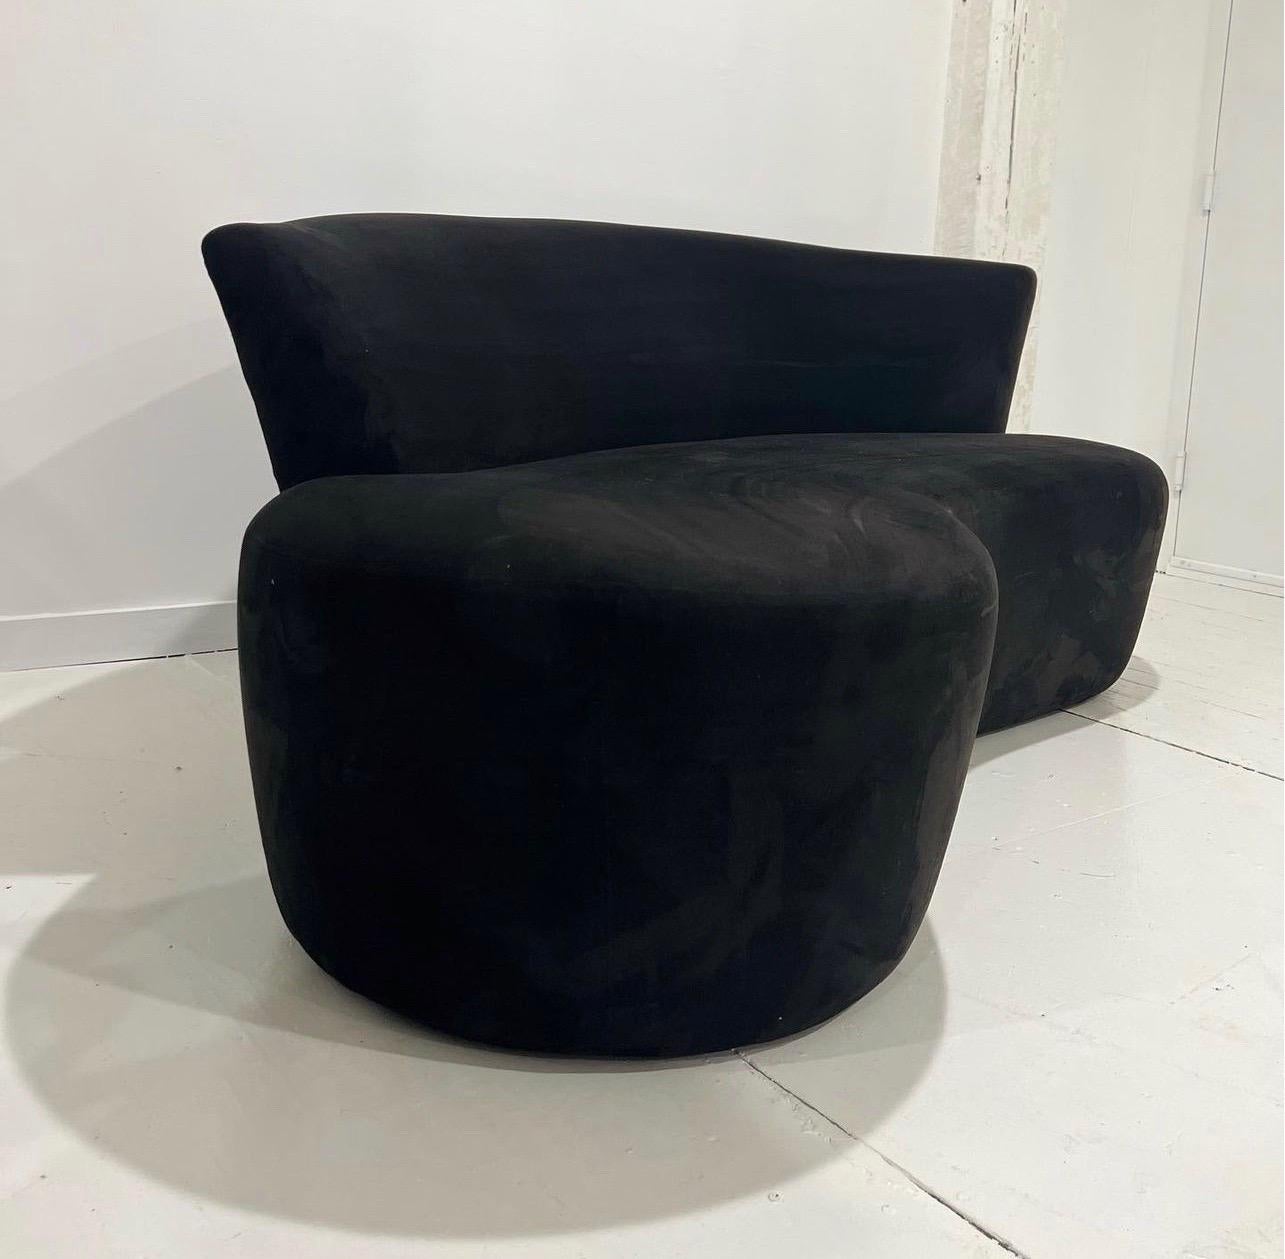 20th Century Vladimir Kagan Curved Black Sofa for Weiman / Preview